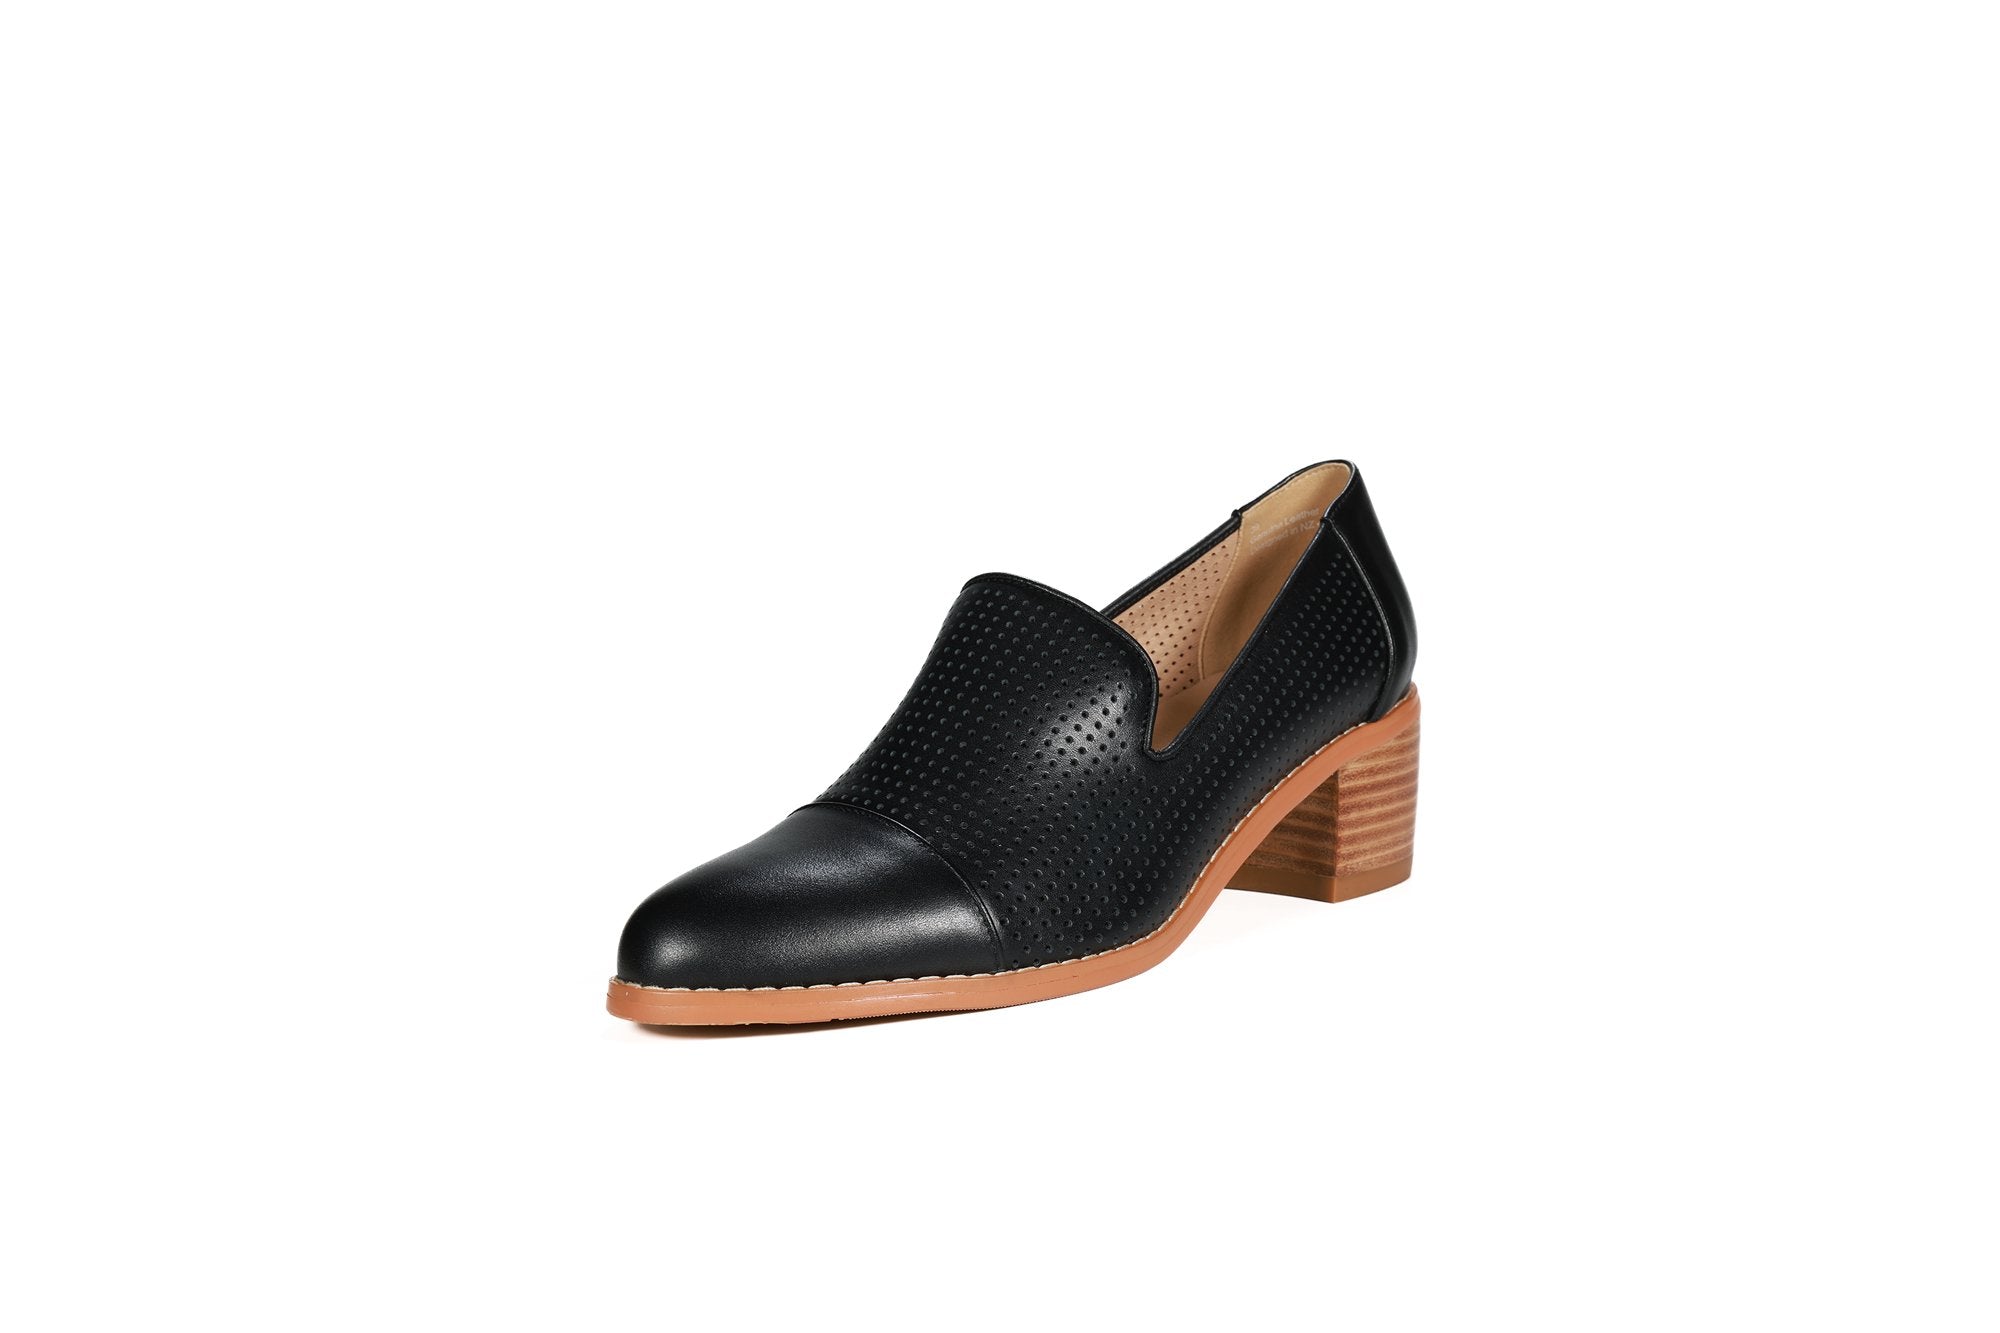 Harris Leather Loafers Black Flats by Sole Shoes NZ F23-36